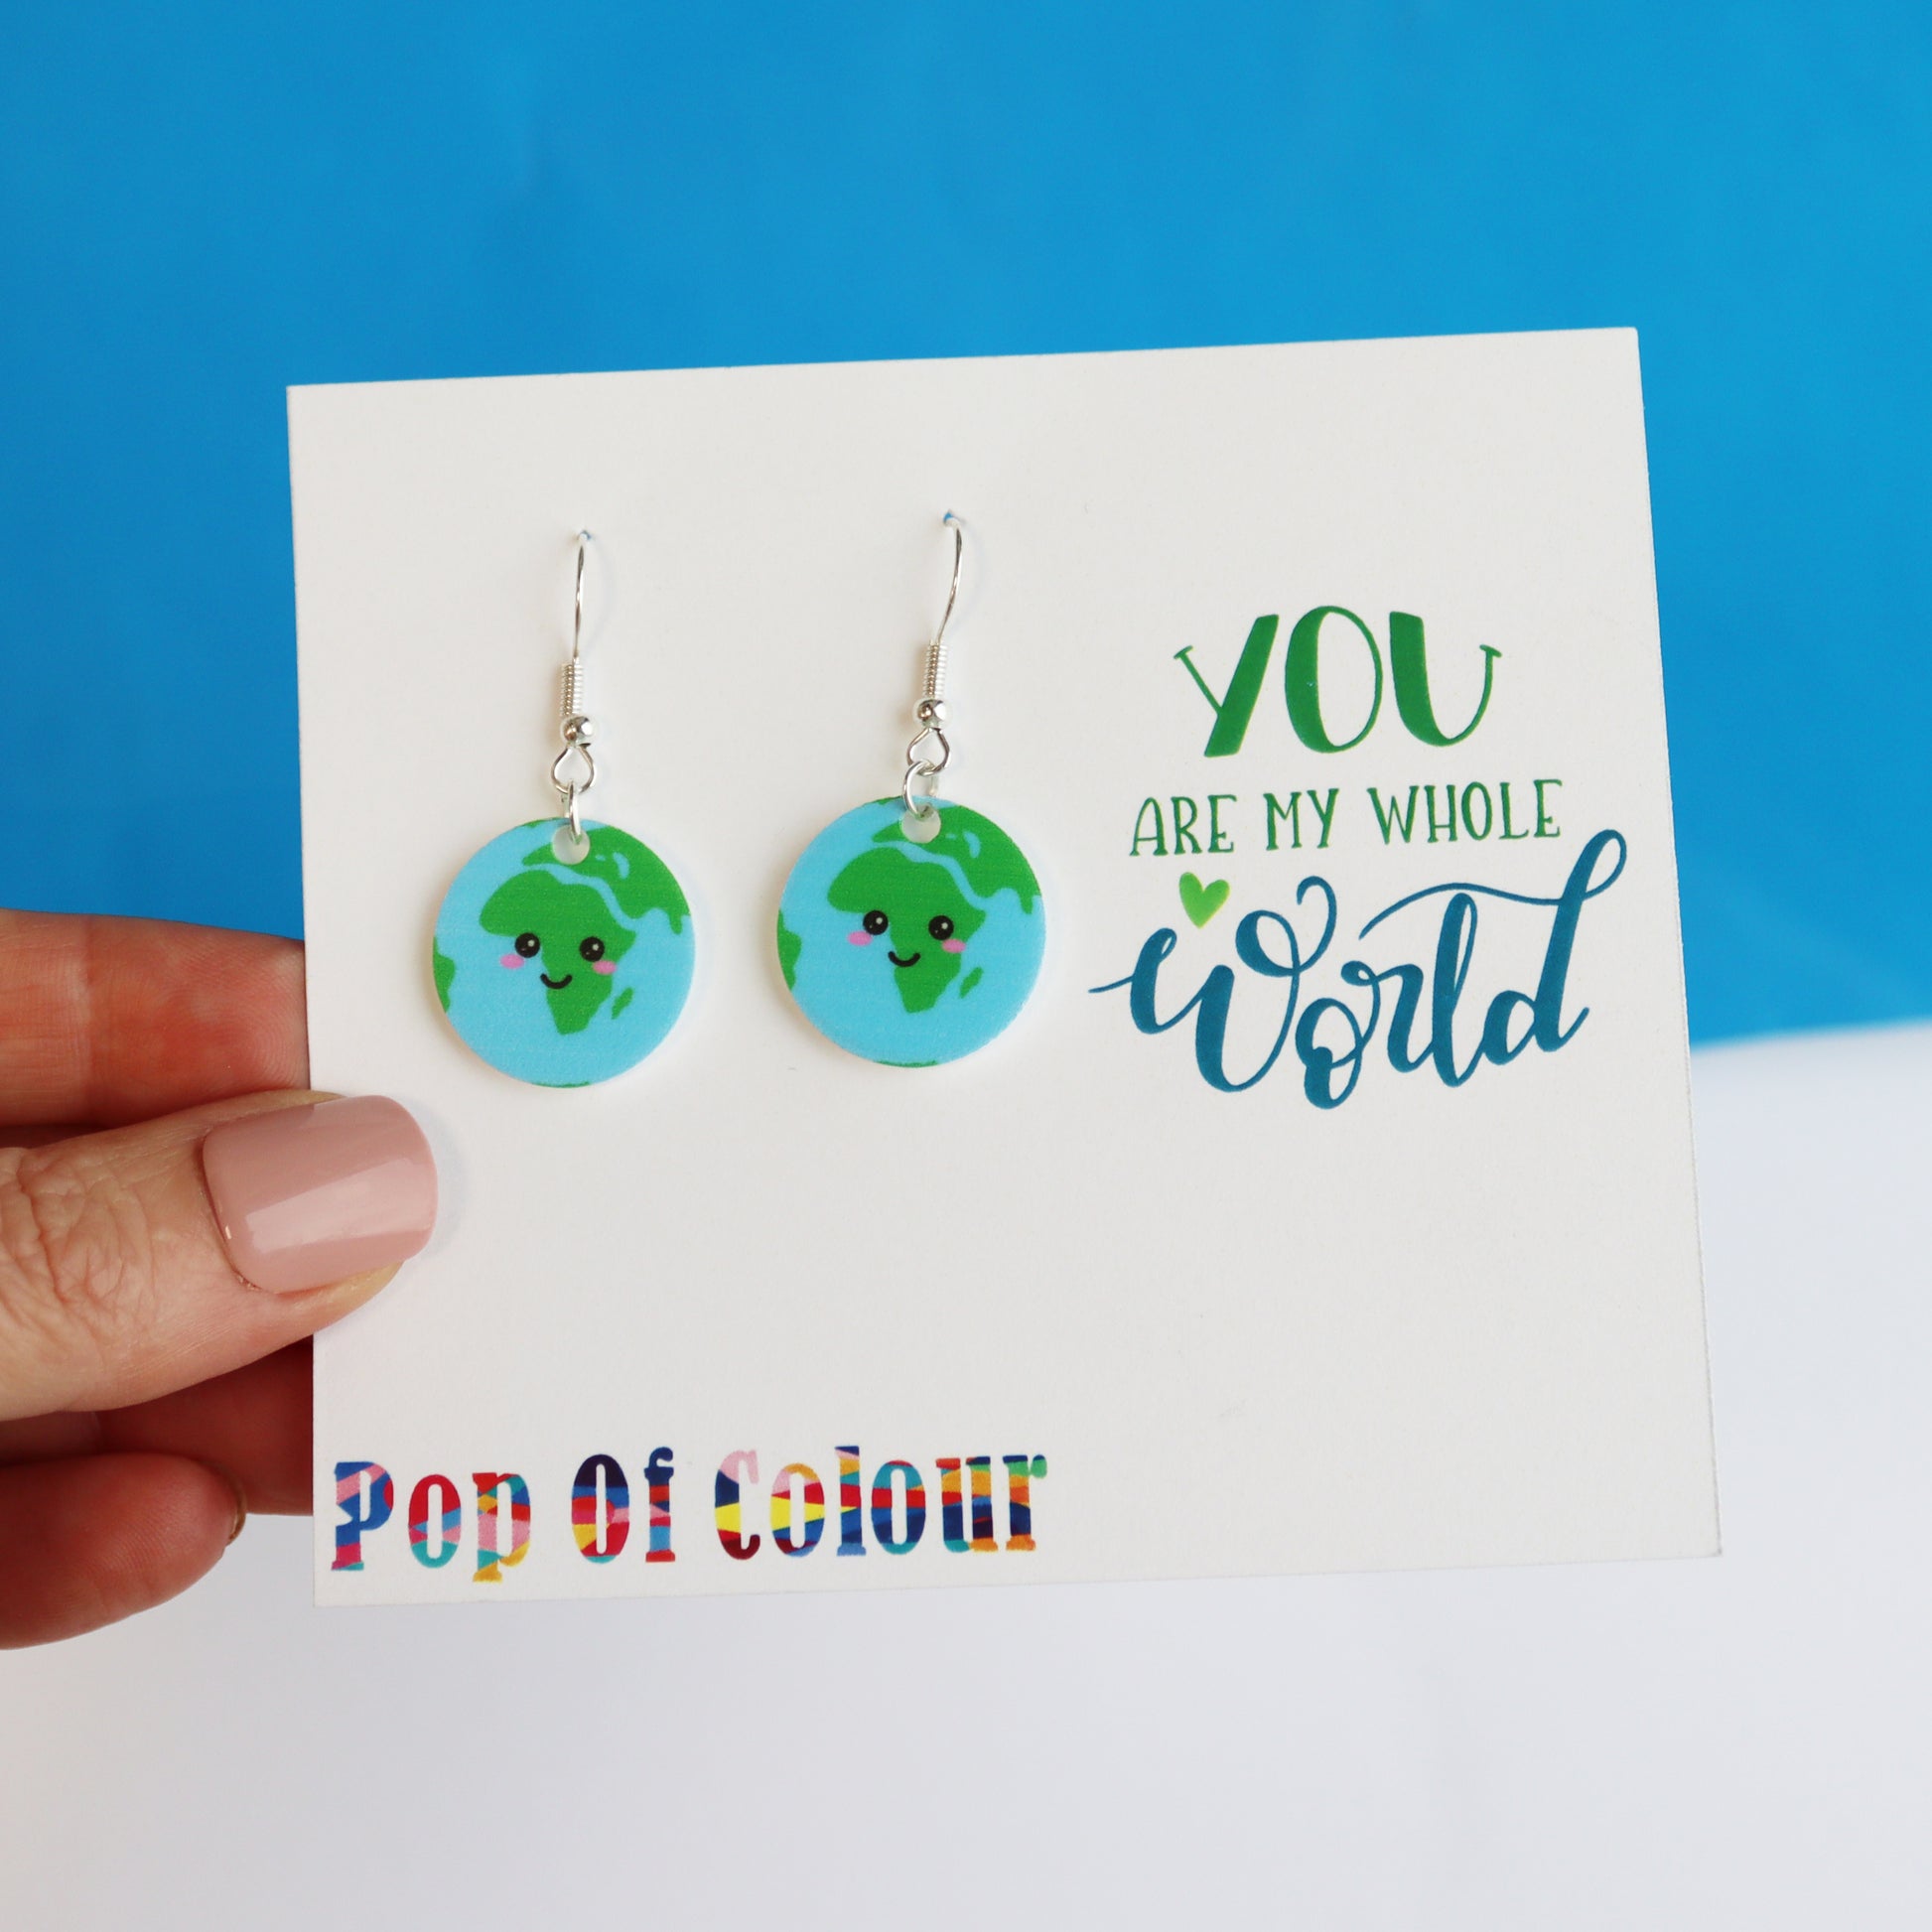 You are my whole world fun kawaii based earth earrings shown on earring backing card with the logo Pop of Colour printed